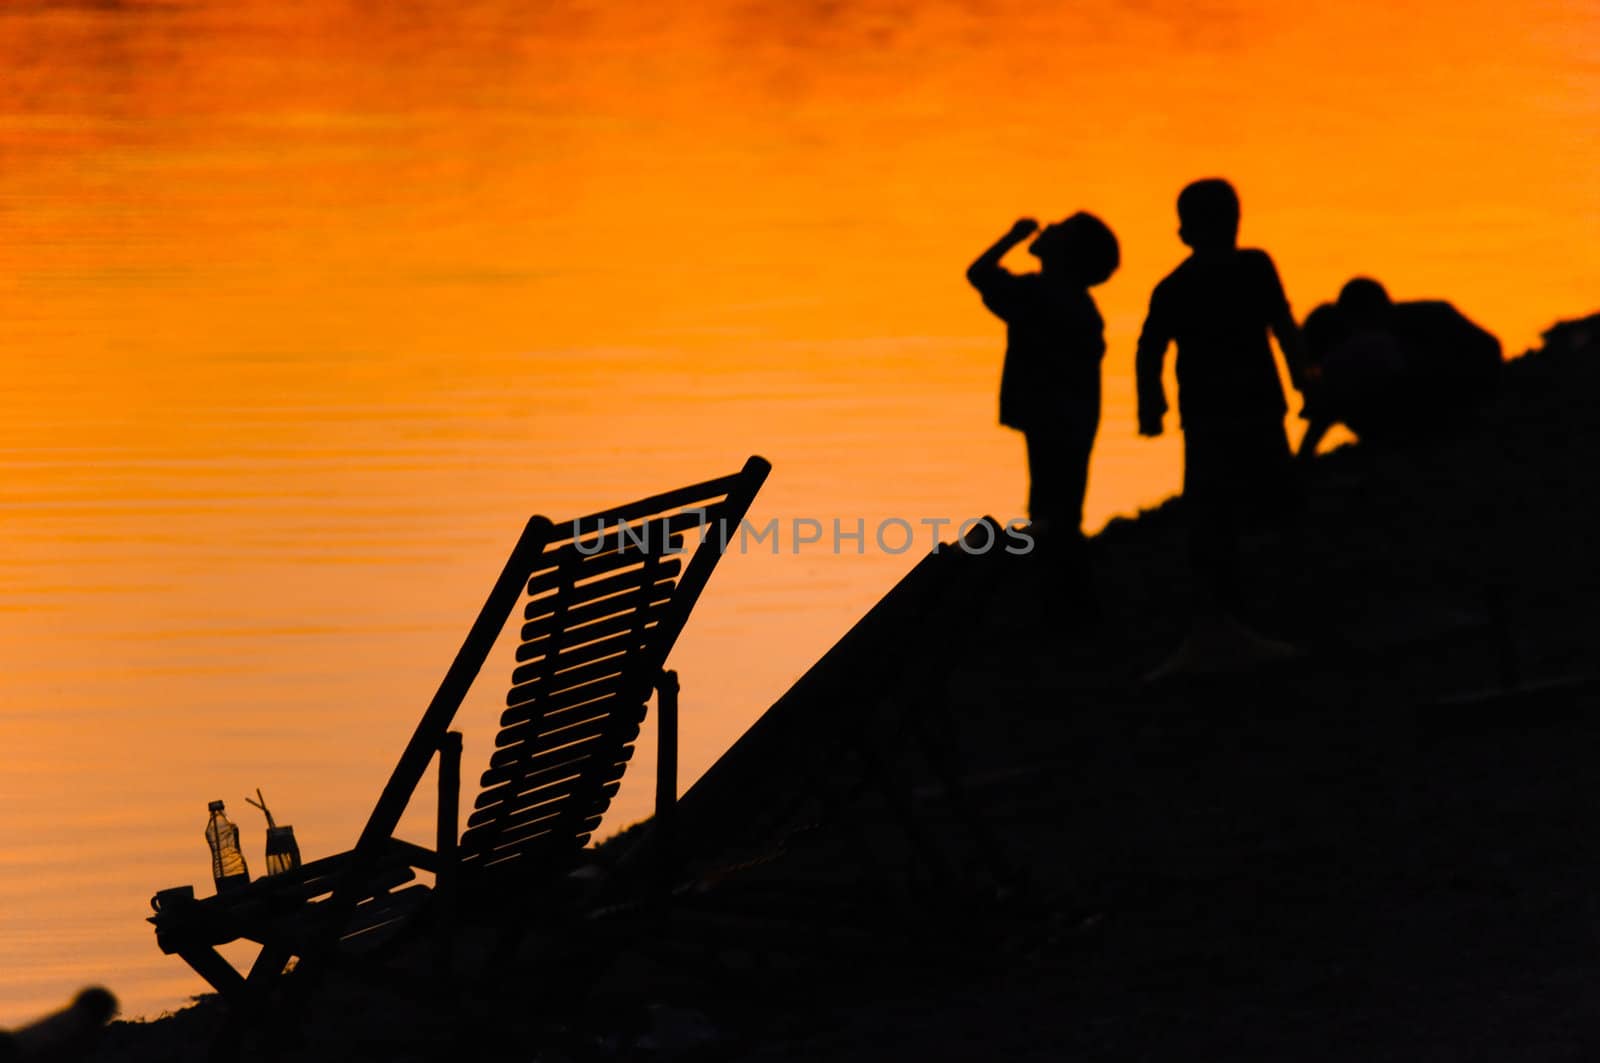 Vacation silhouette scene by photo4dreams